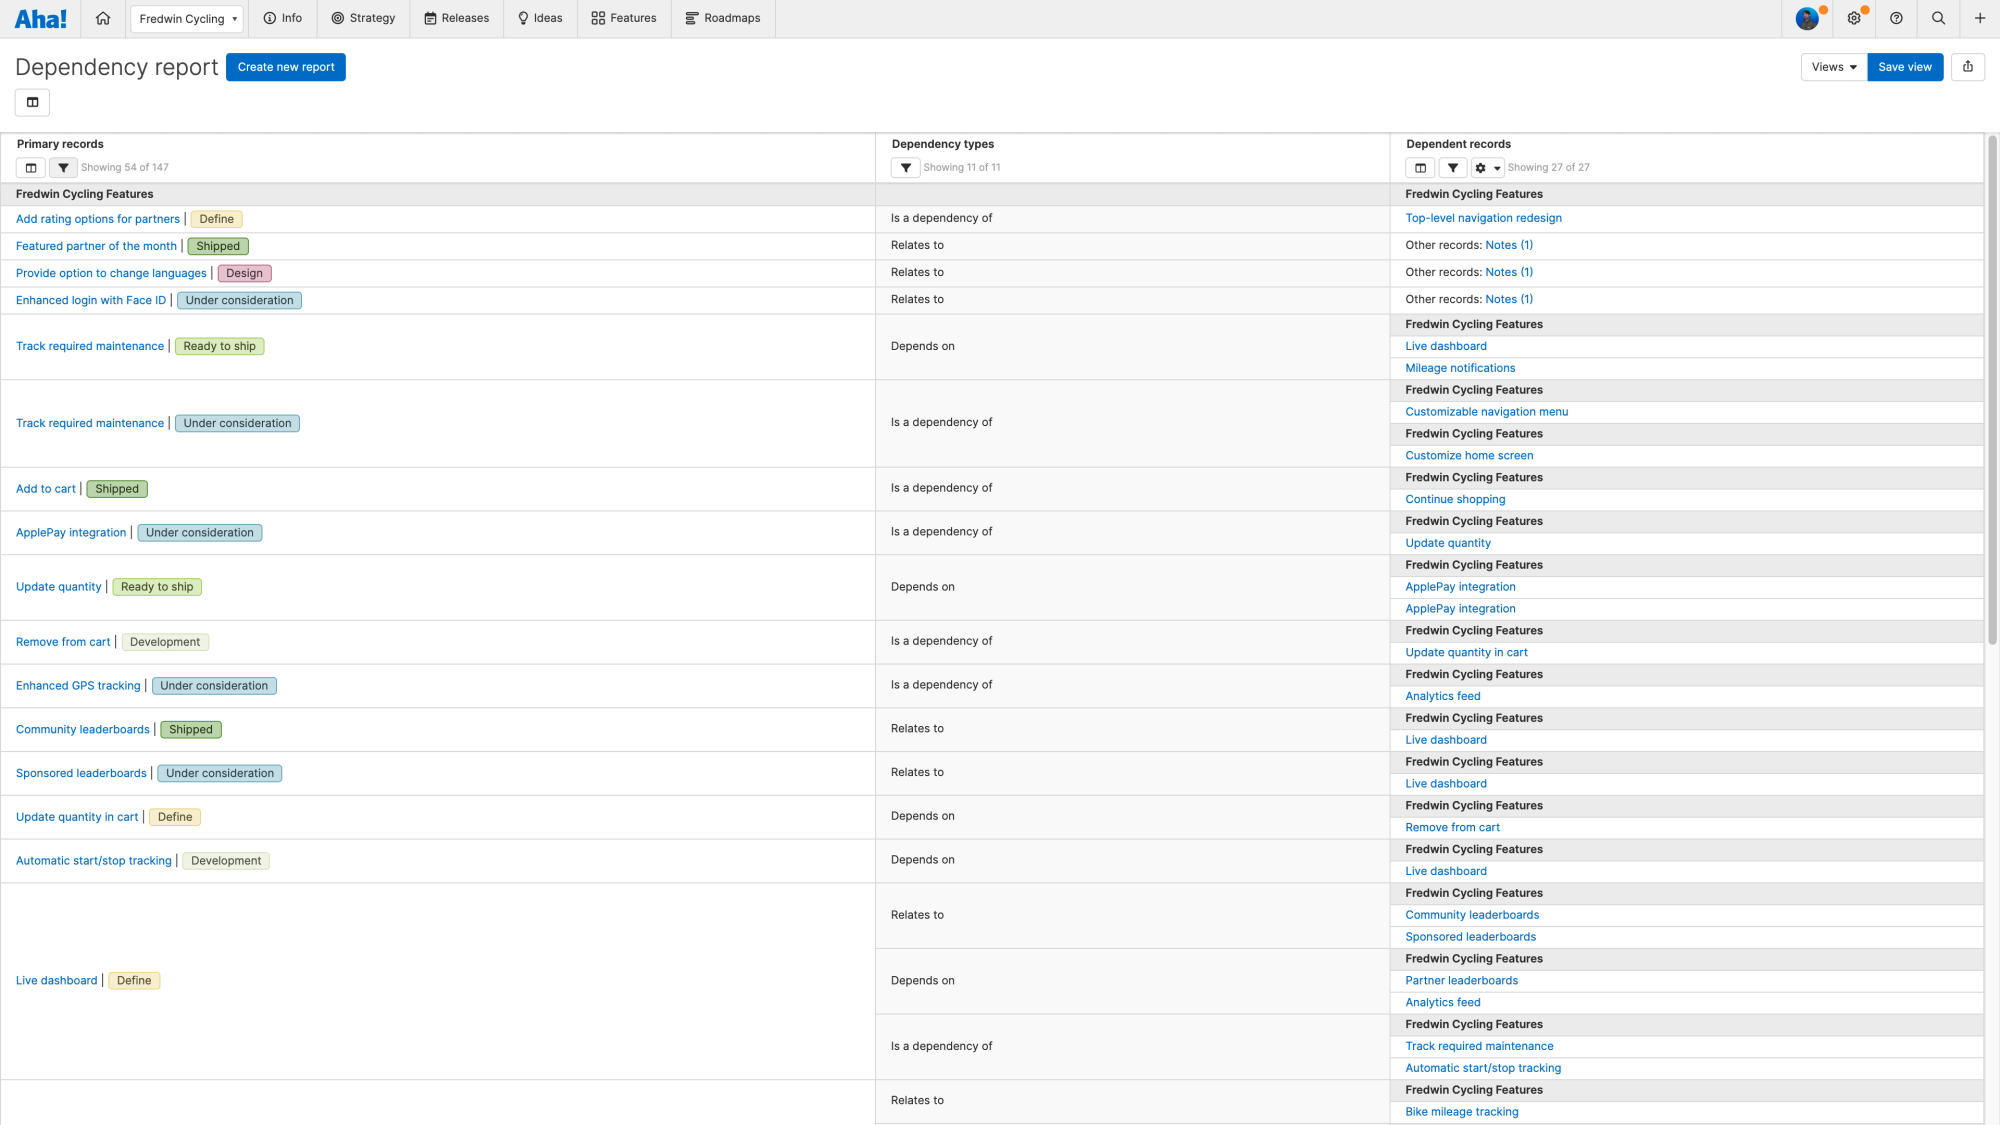 Dependency report showing features and their dependencies.